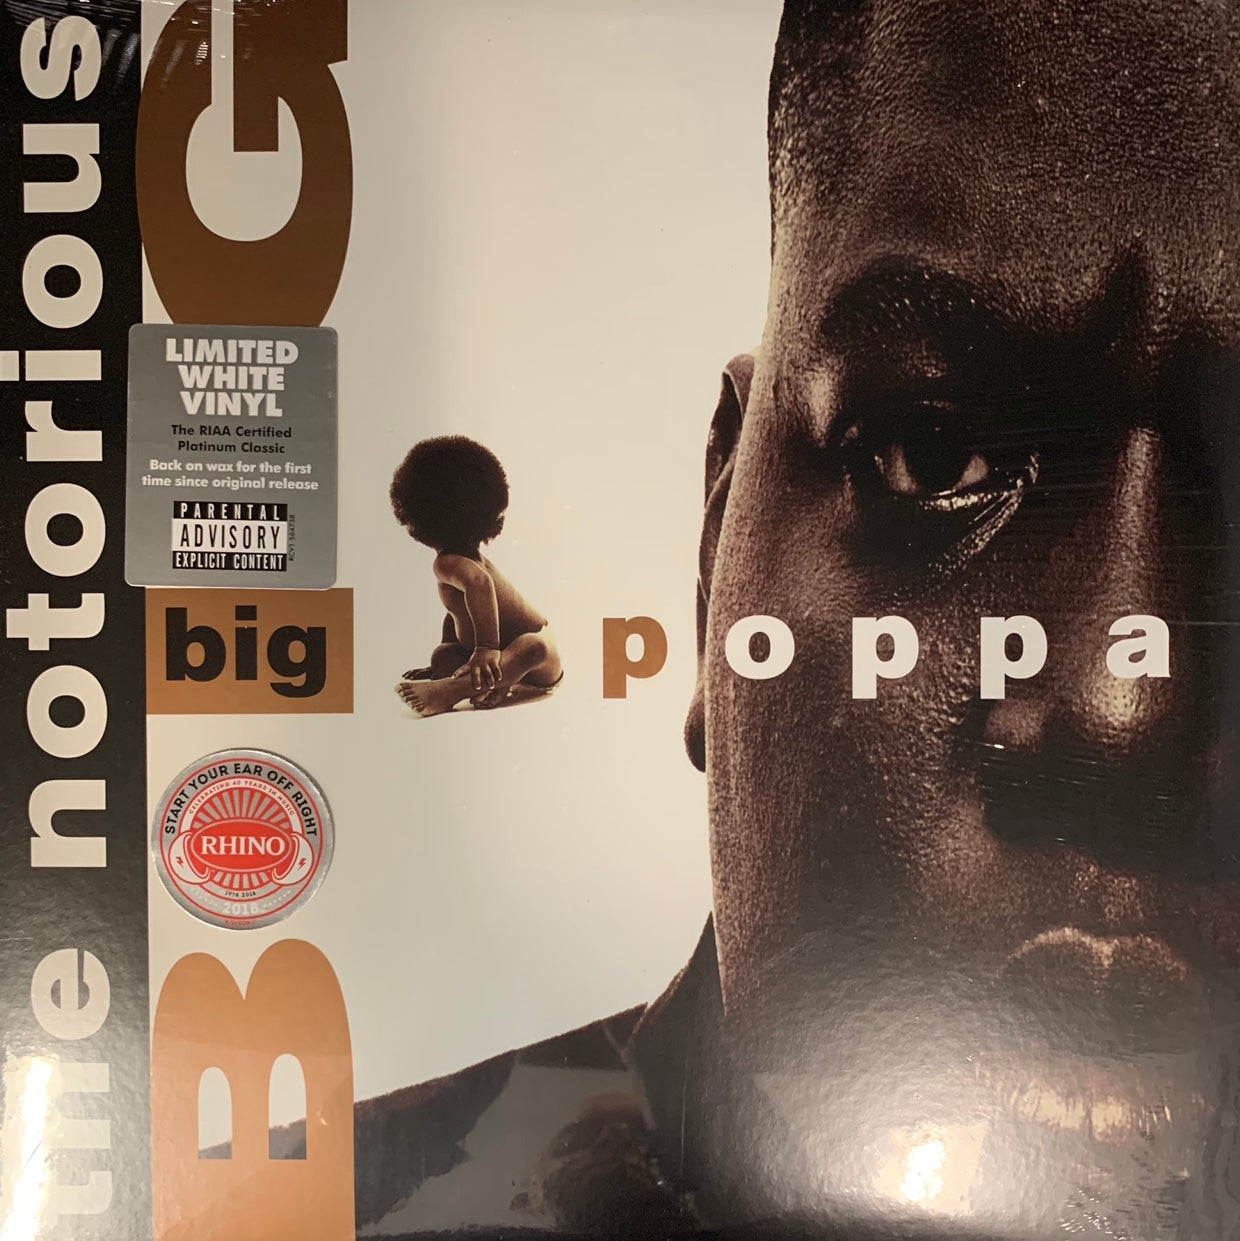 The Notorious B.I.G. “Big Poppa” limited edition white vinyl, factory sealed copy